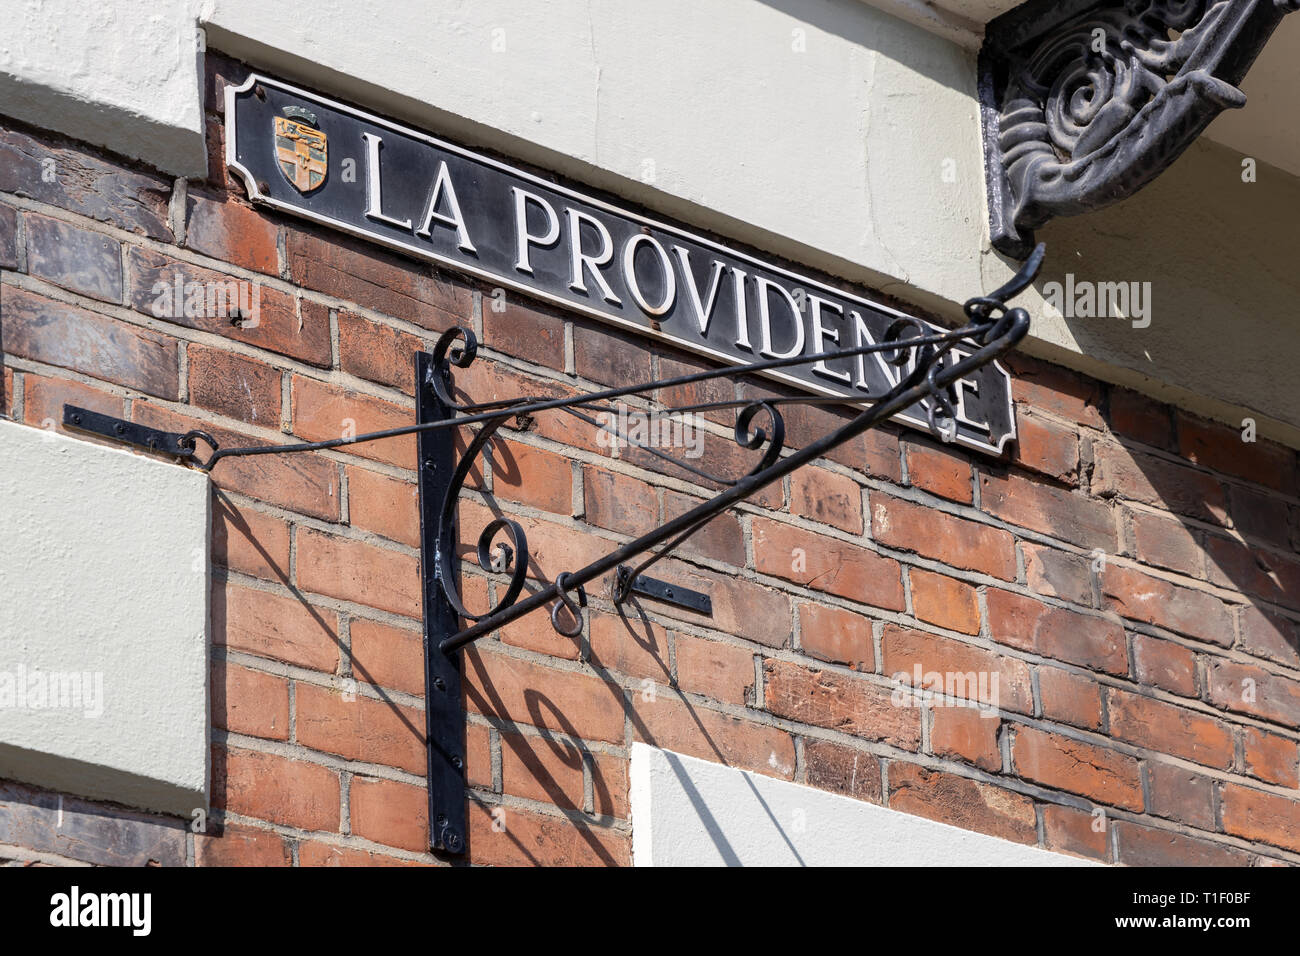 ROCHESTER, KENT/UK - MARCH 24 : La Providence street sign at the site of the old French hospital  in Rochester on March 24, 2019 Stock Photo